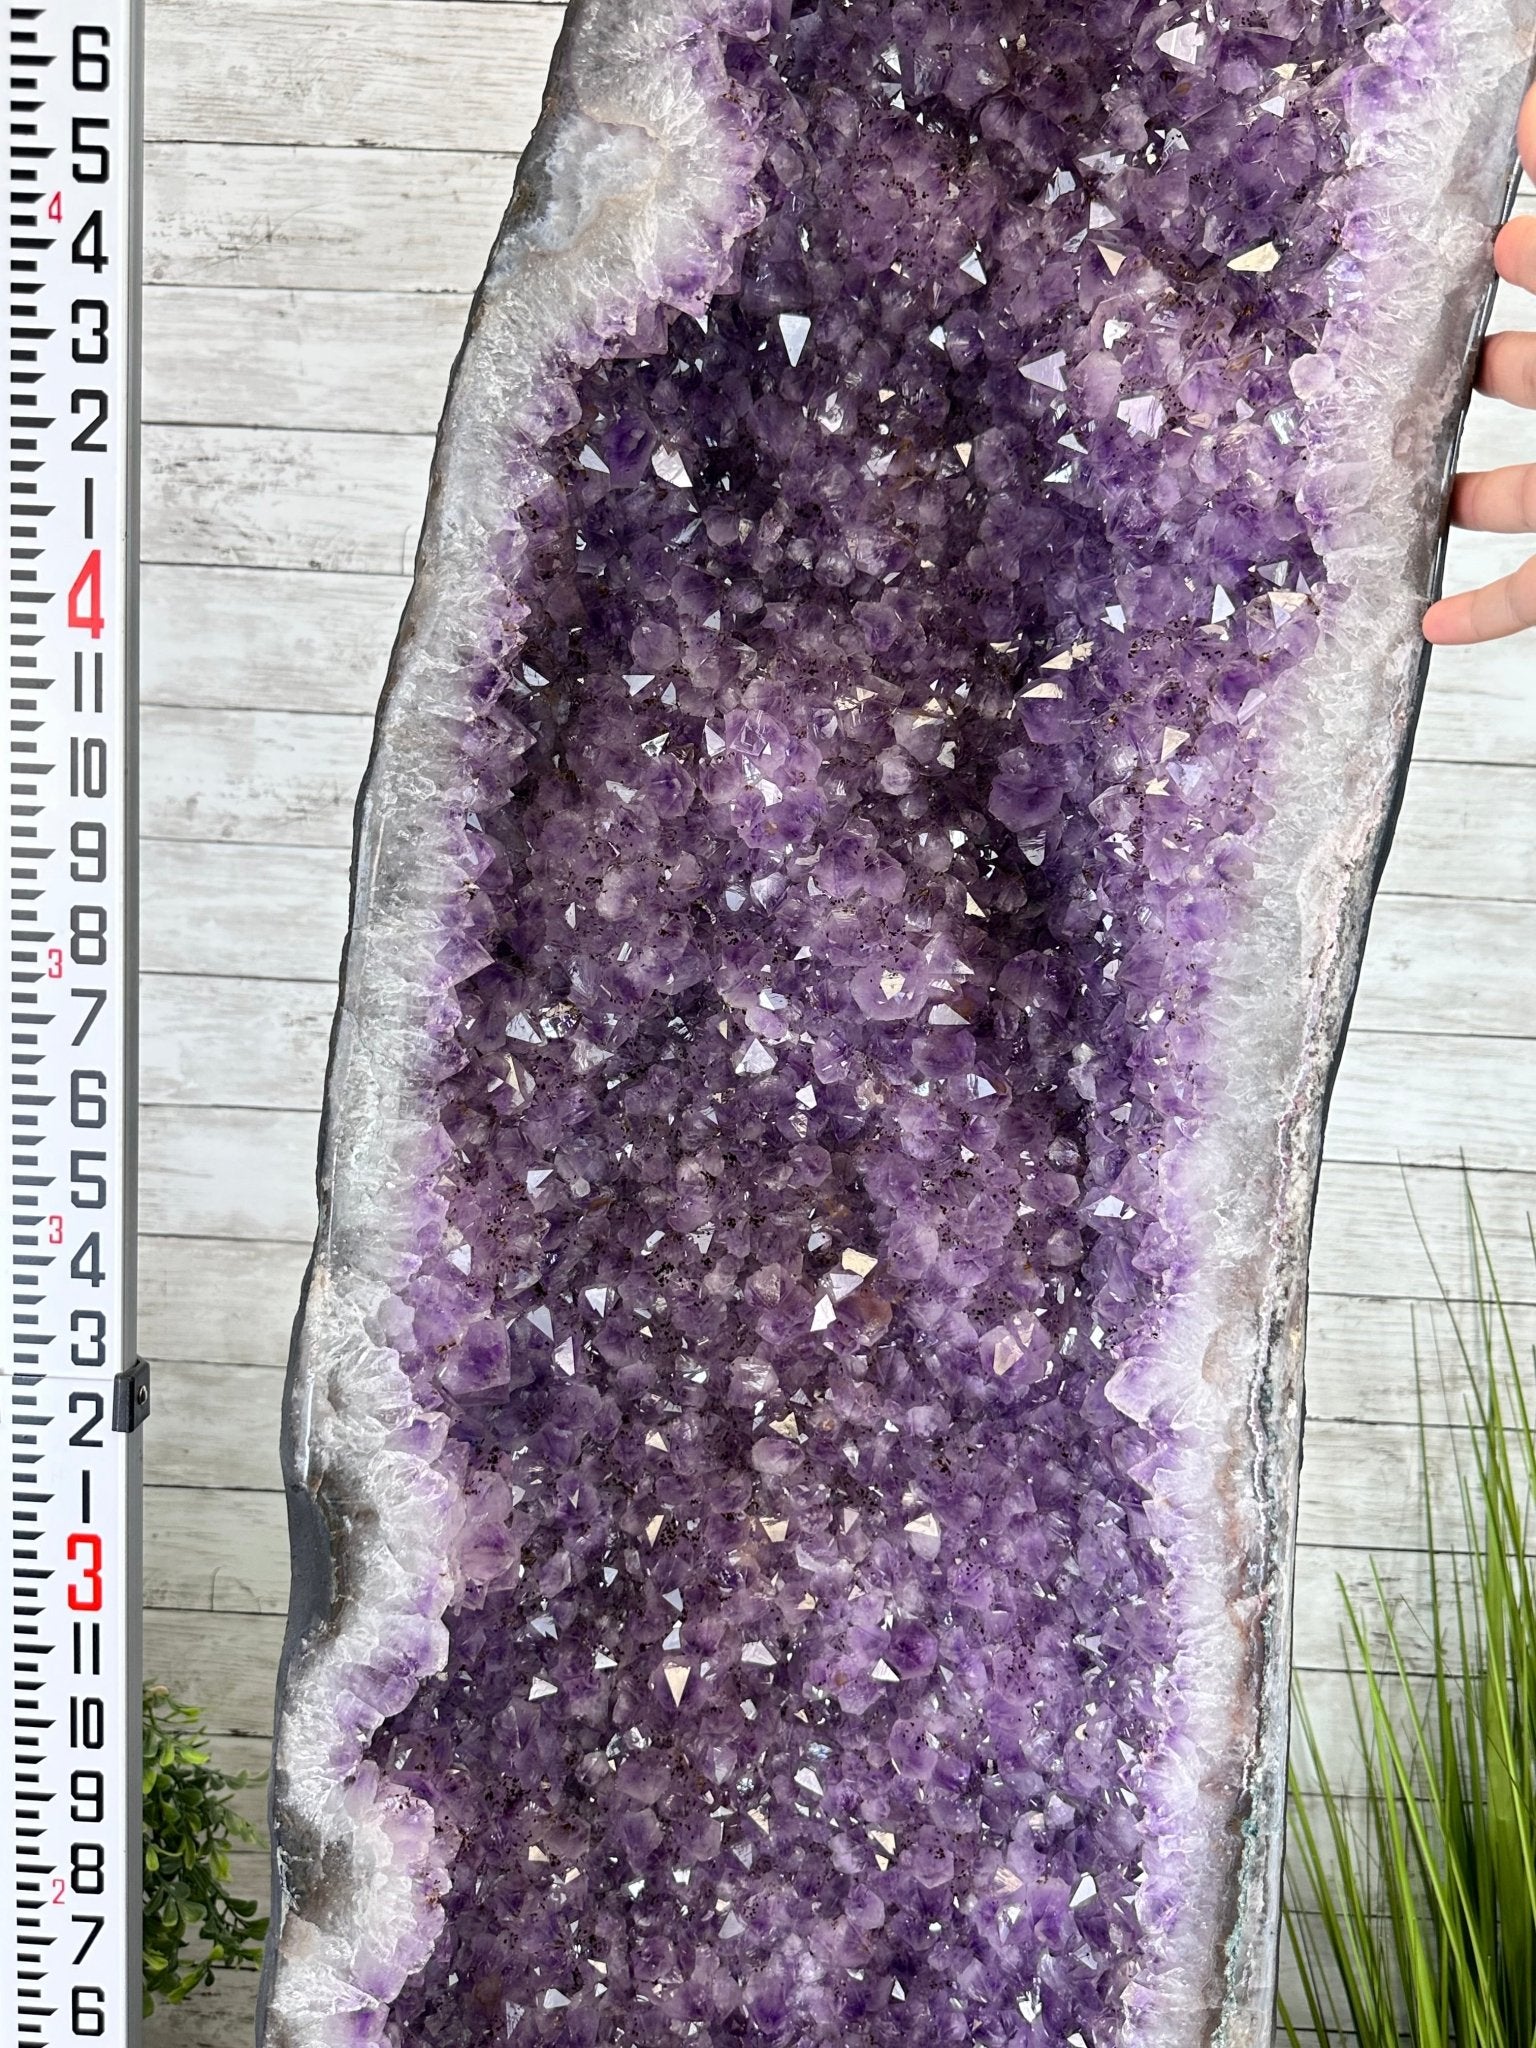 Extra Quality Brazilian Amethyst Cathedral, 510 lbs & 70" Tall #5601-1335 - Brazil GemsBrazil GemsExtra Quality Brazilian Amethyst Cathedral, 510 lbs & 70" Tall #5601-1335Cathedrals5601-1335